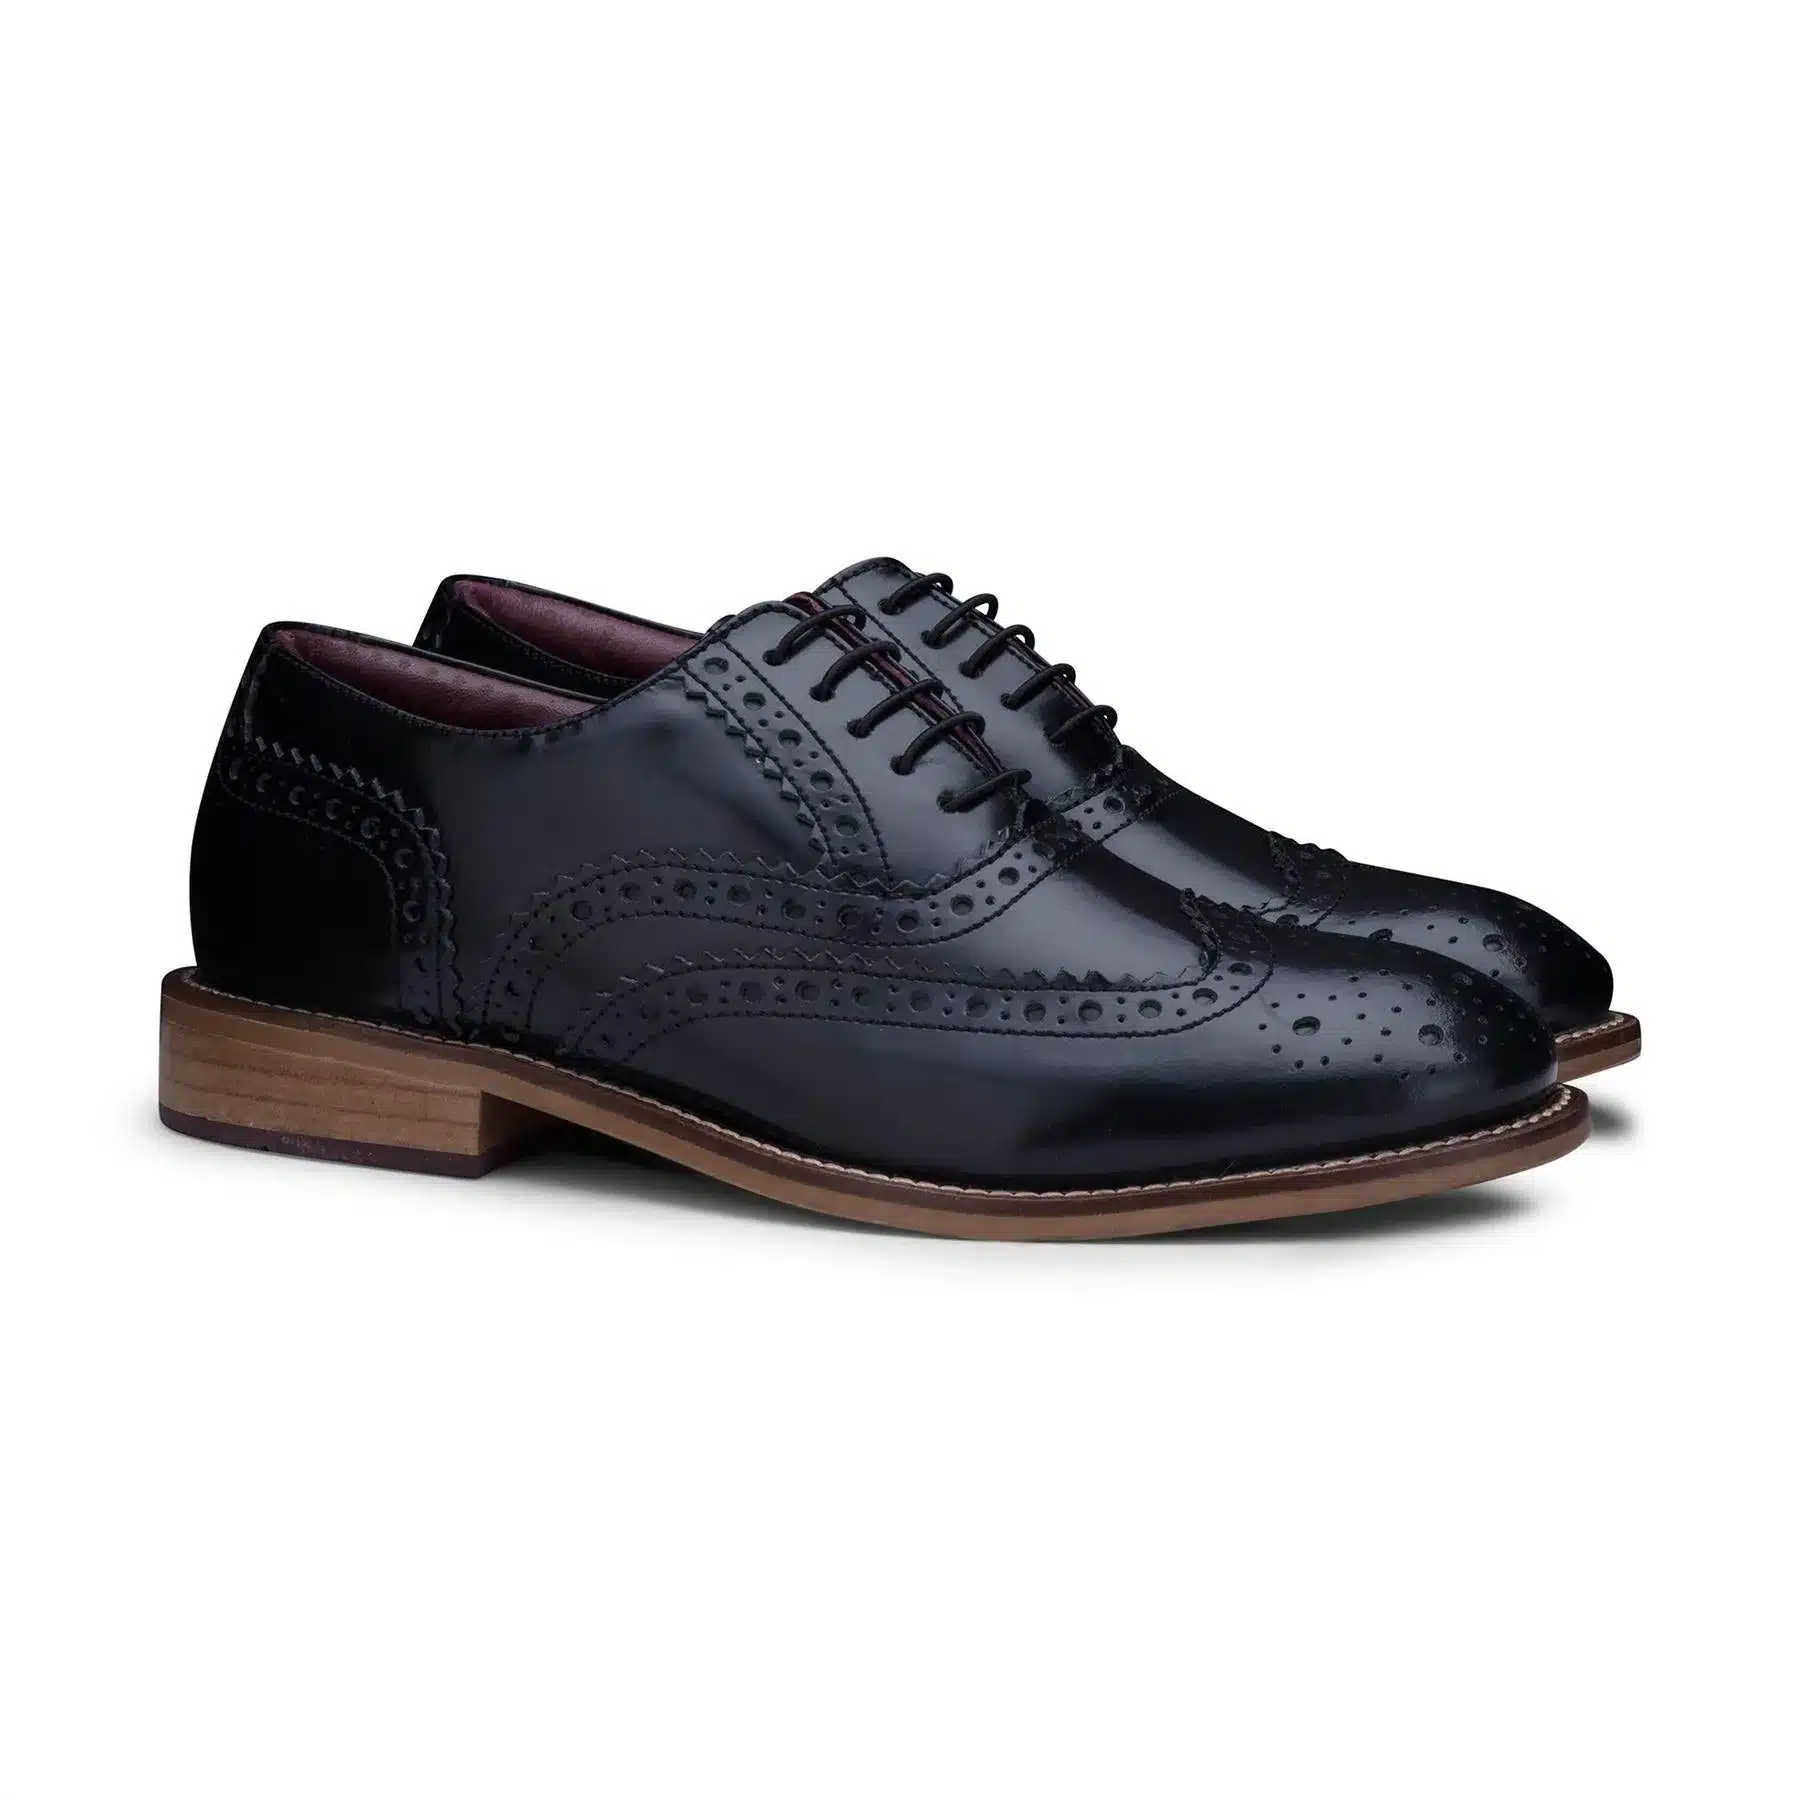 Kids Childrens Boys Real Leather Brogues Laced Smart Formal Vintage Classic Peaky